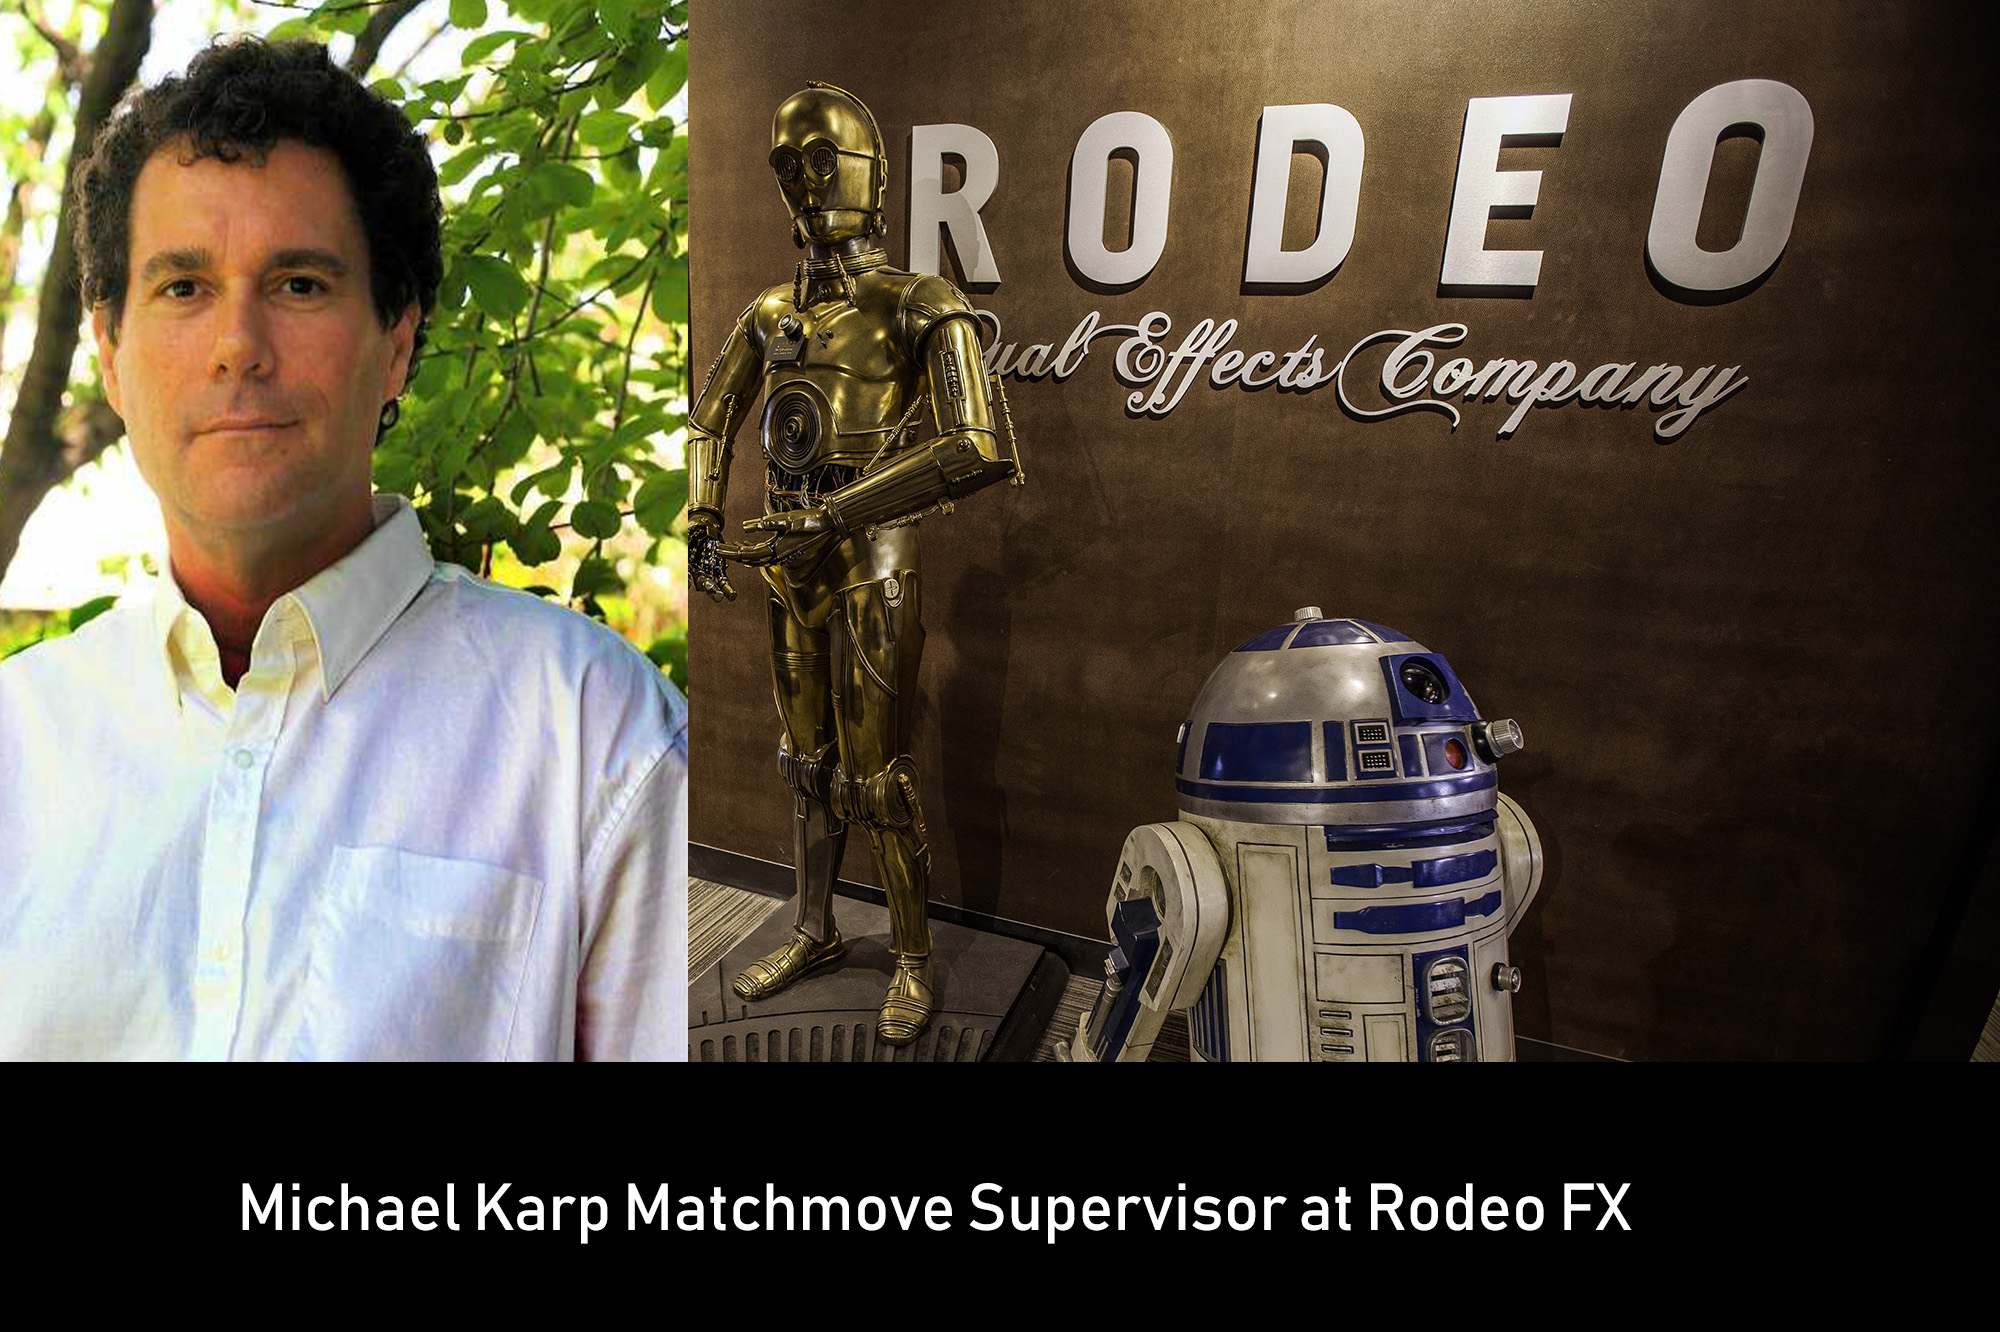 Interview with Michael Karp Matchmove Supervisor at Rodeo FX